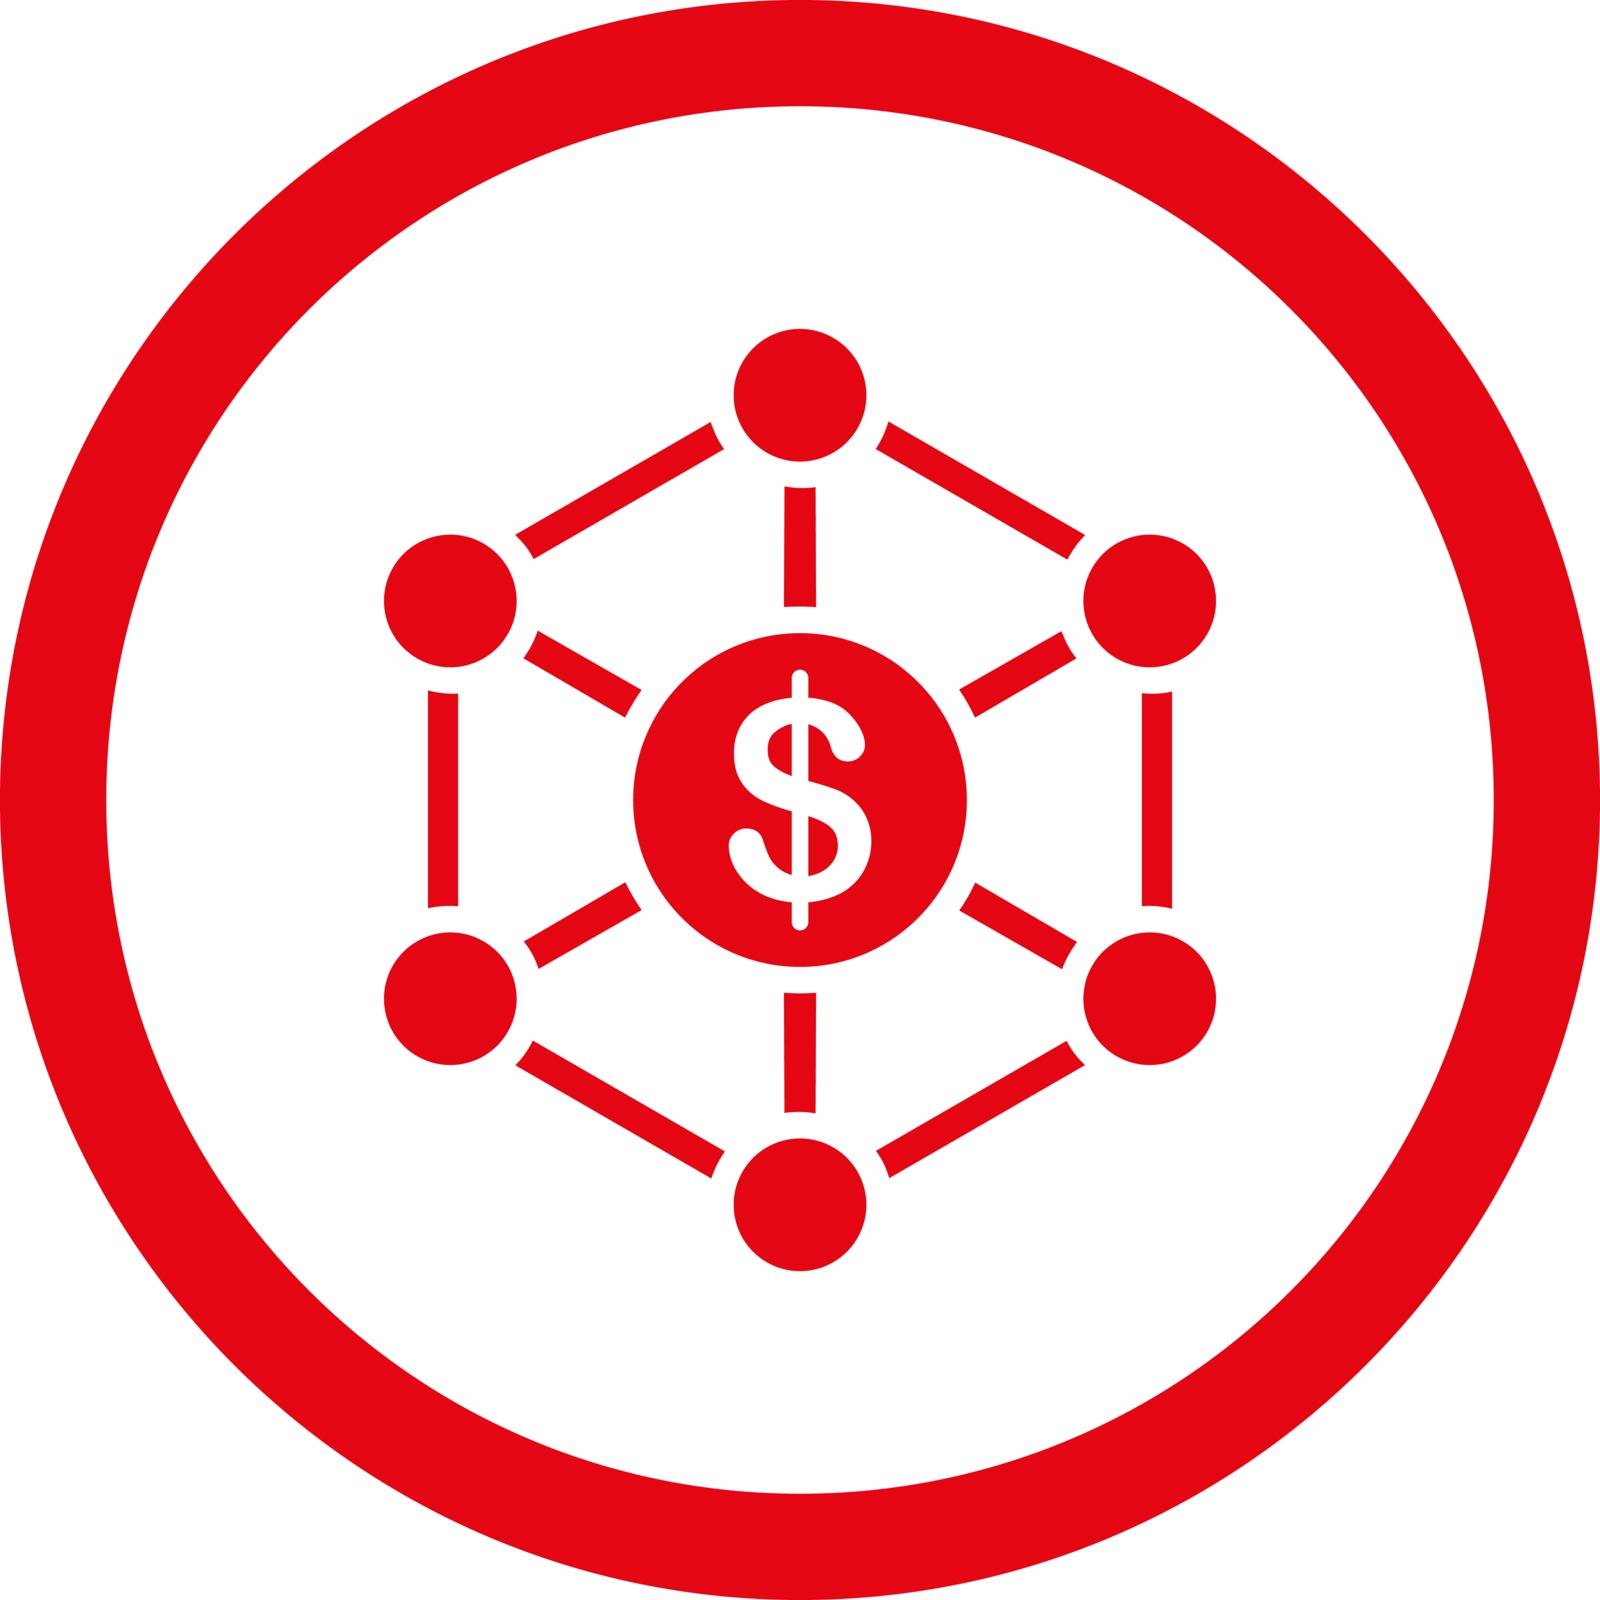 Scheme vector icon. This flat rounded symbol uses red color and isolated on a white background.